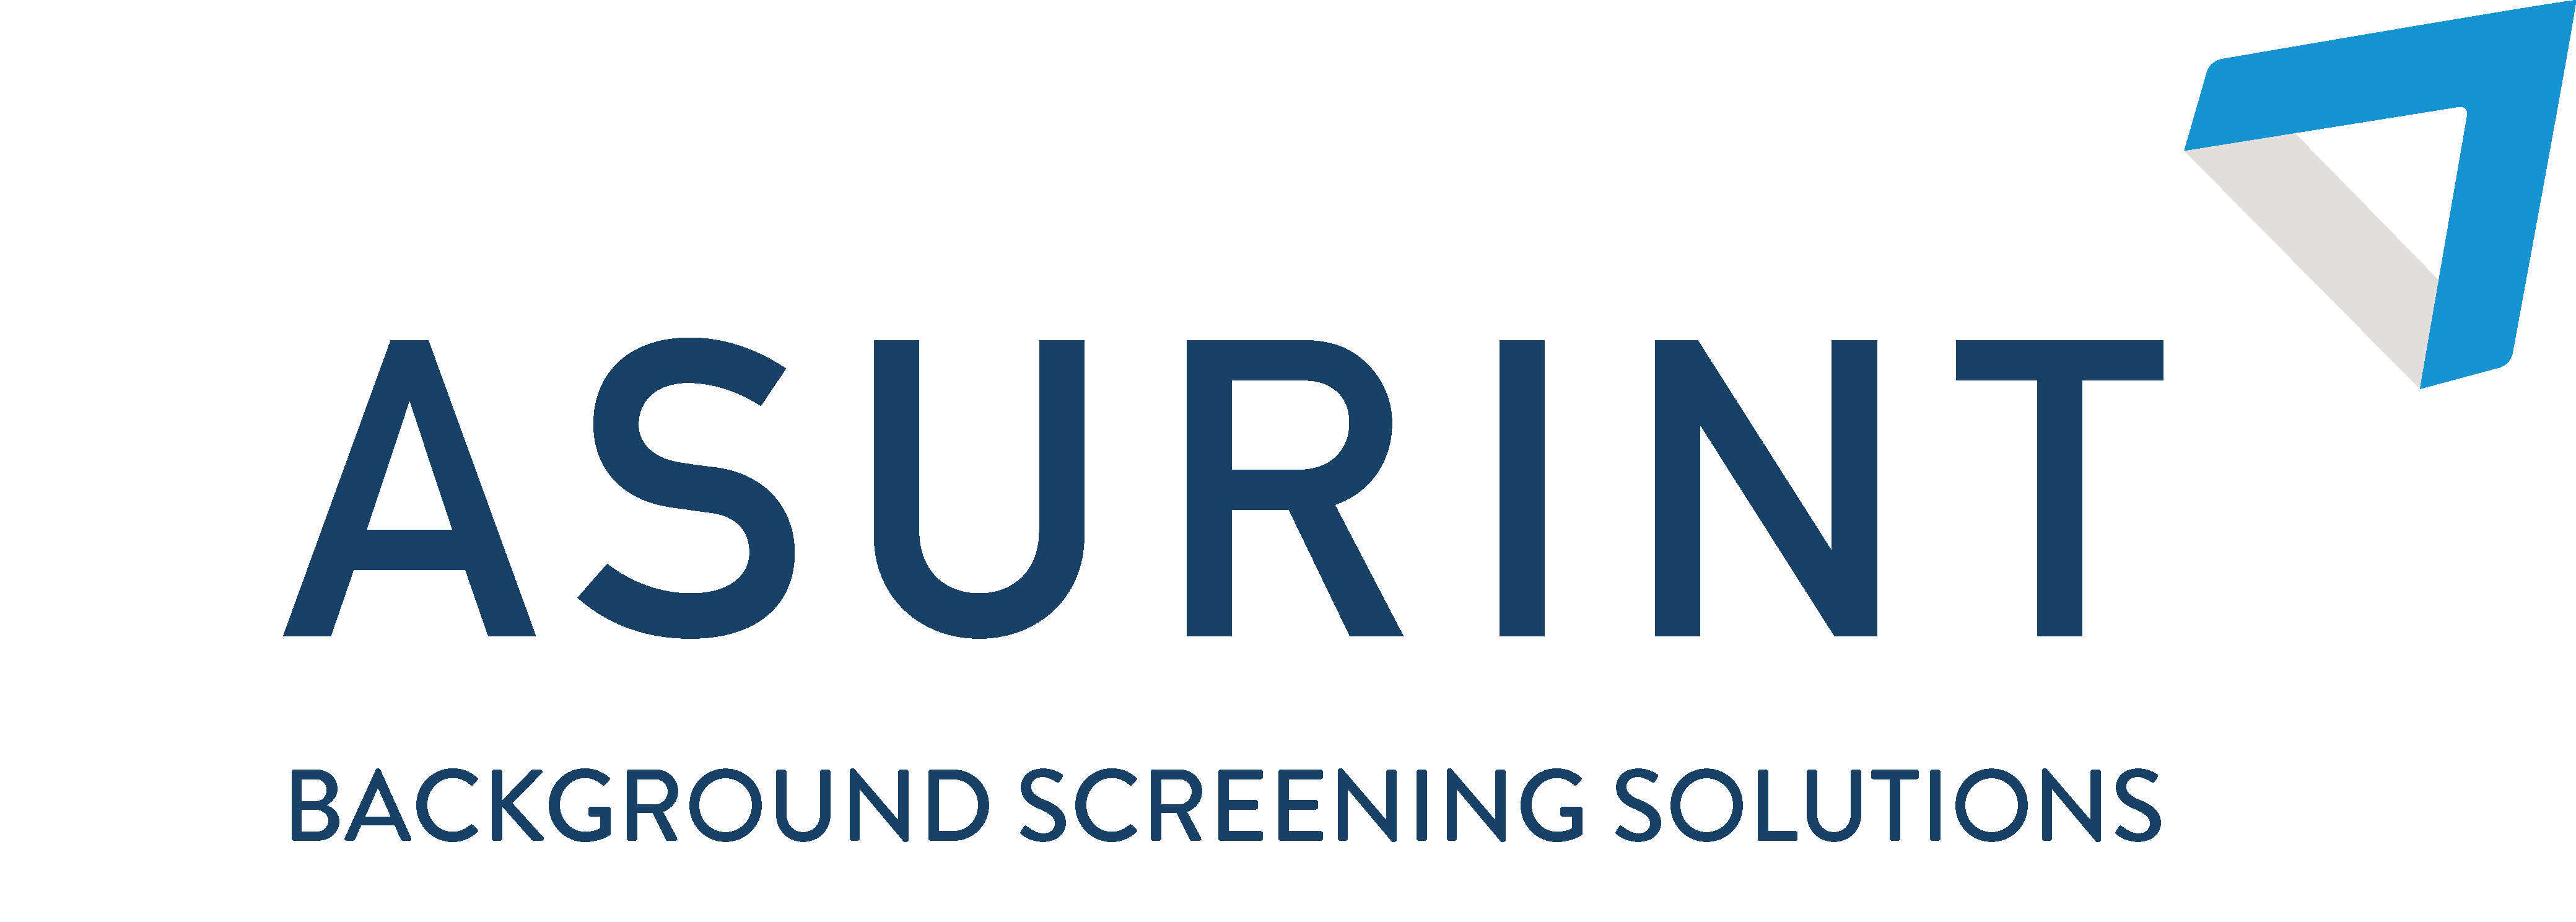 Asurint Named to 202